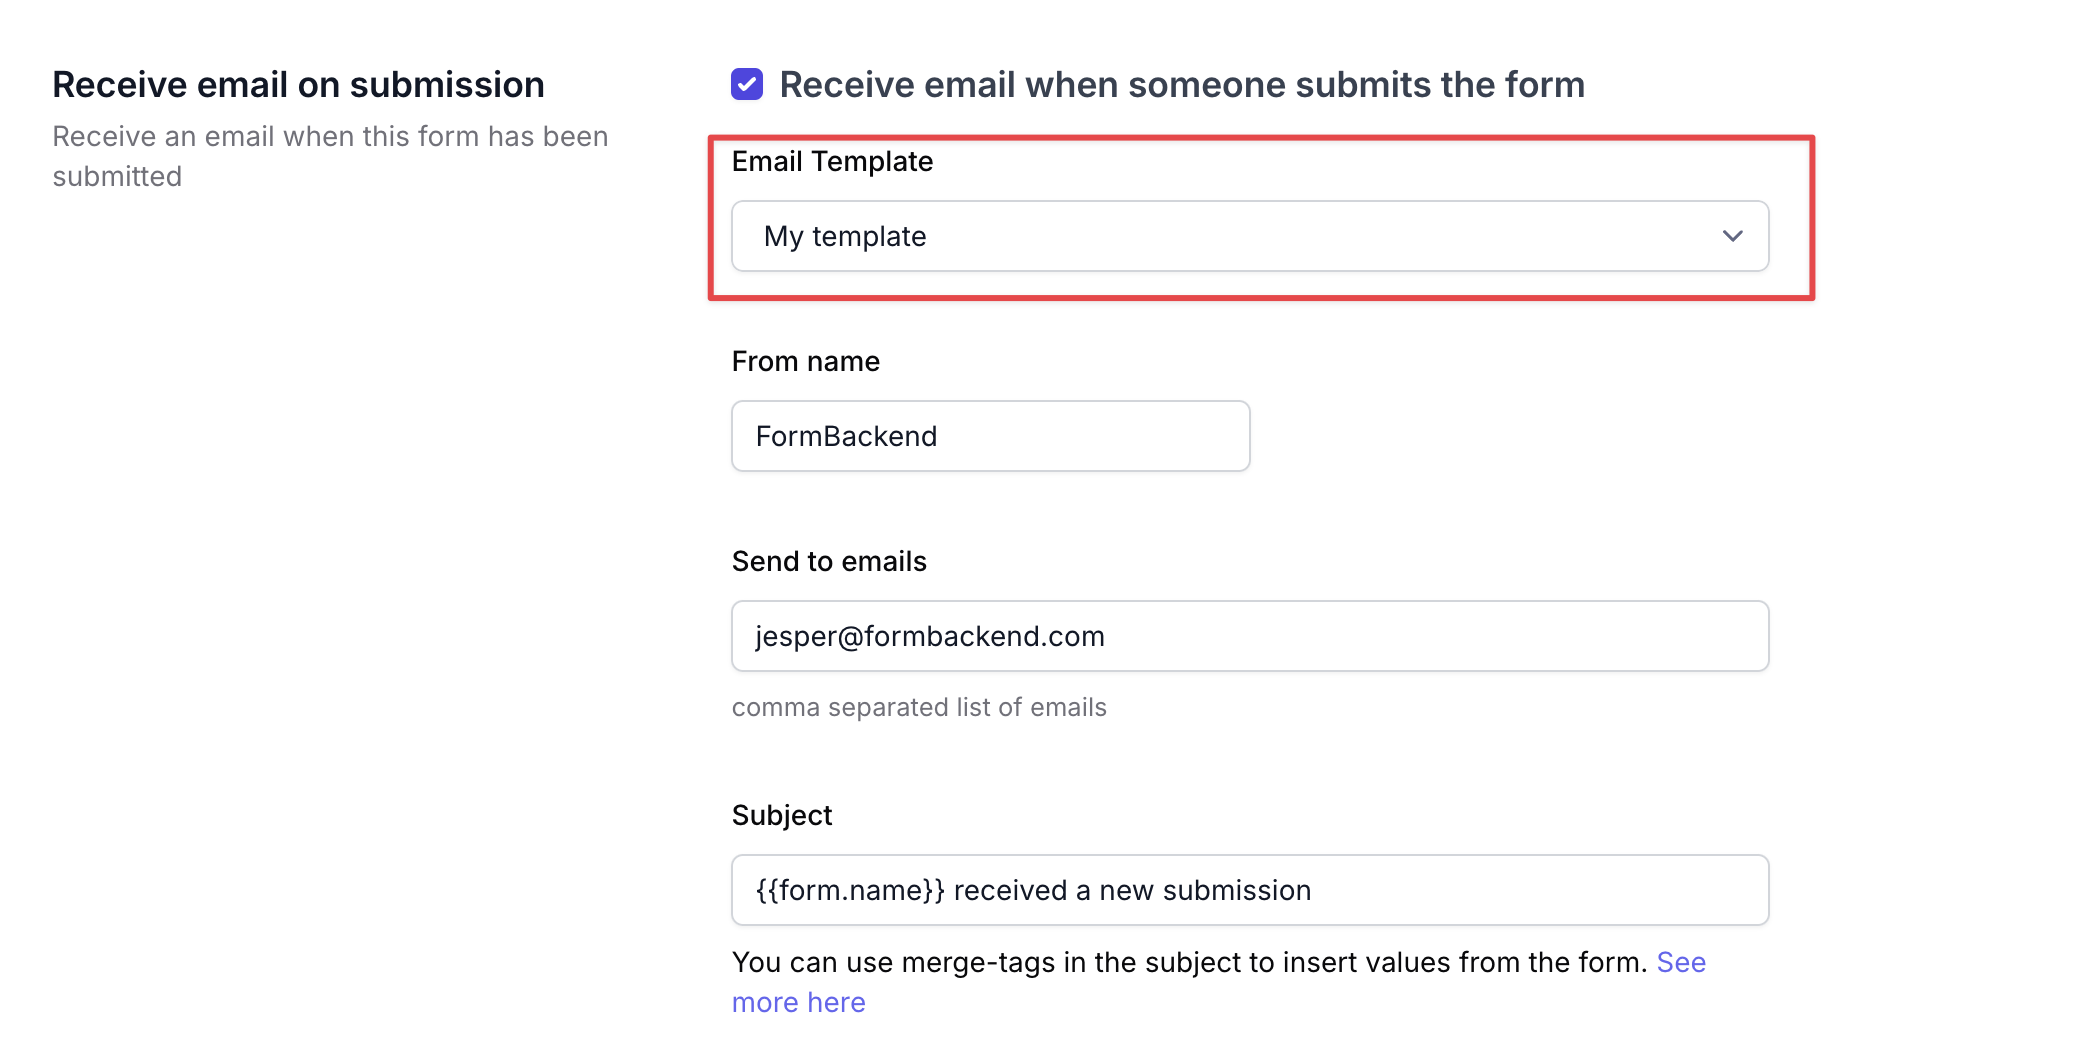 Selecting your new email template